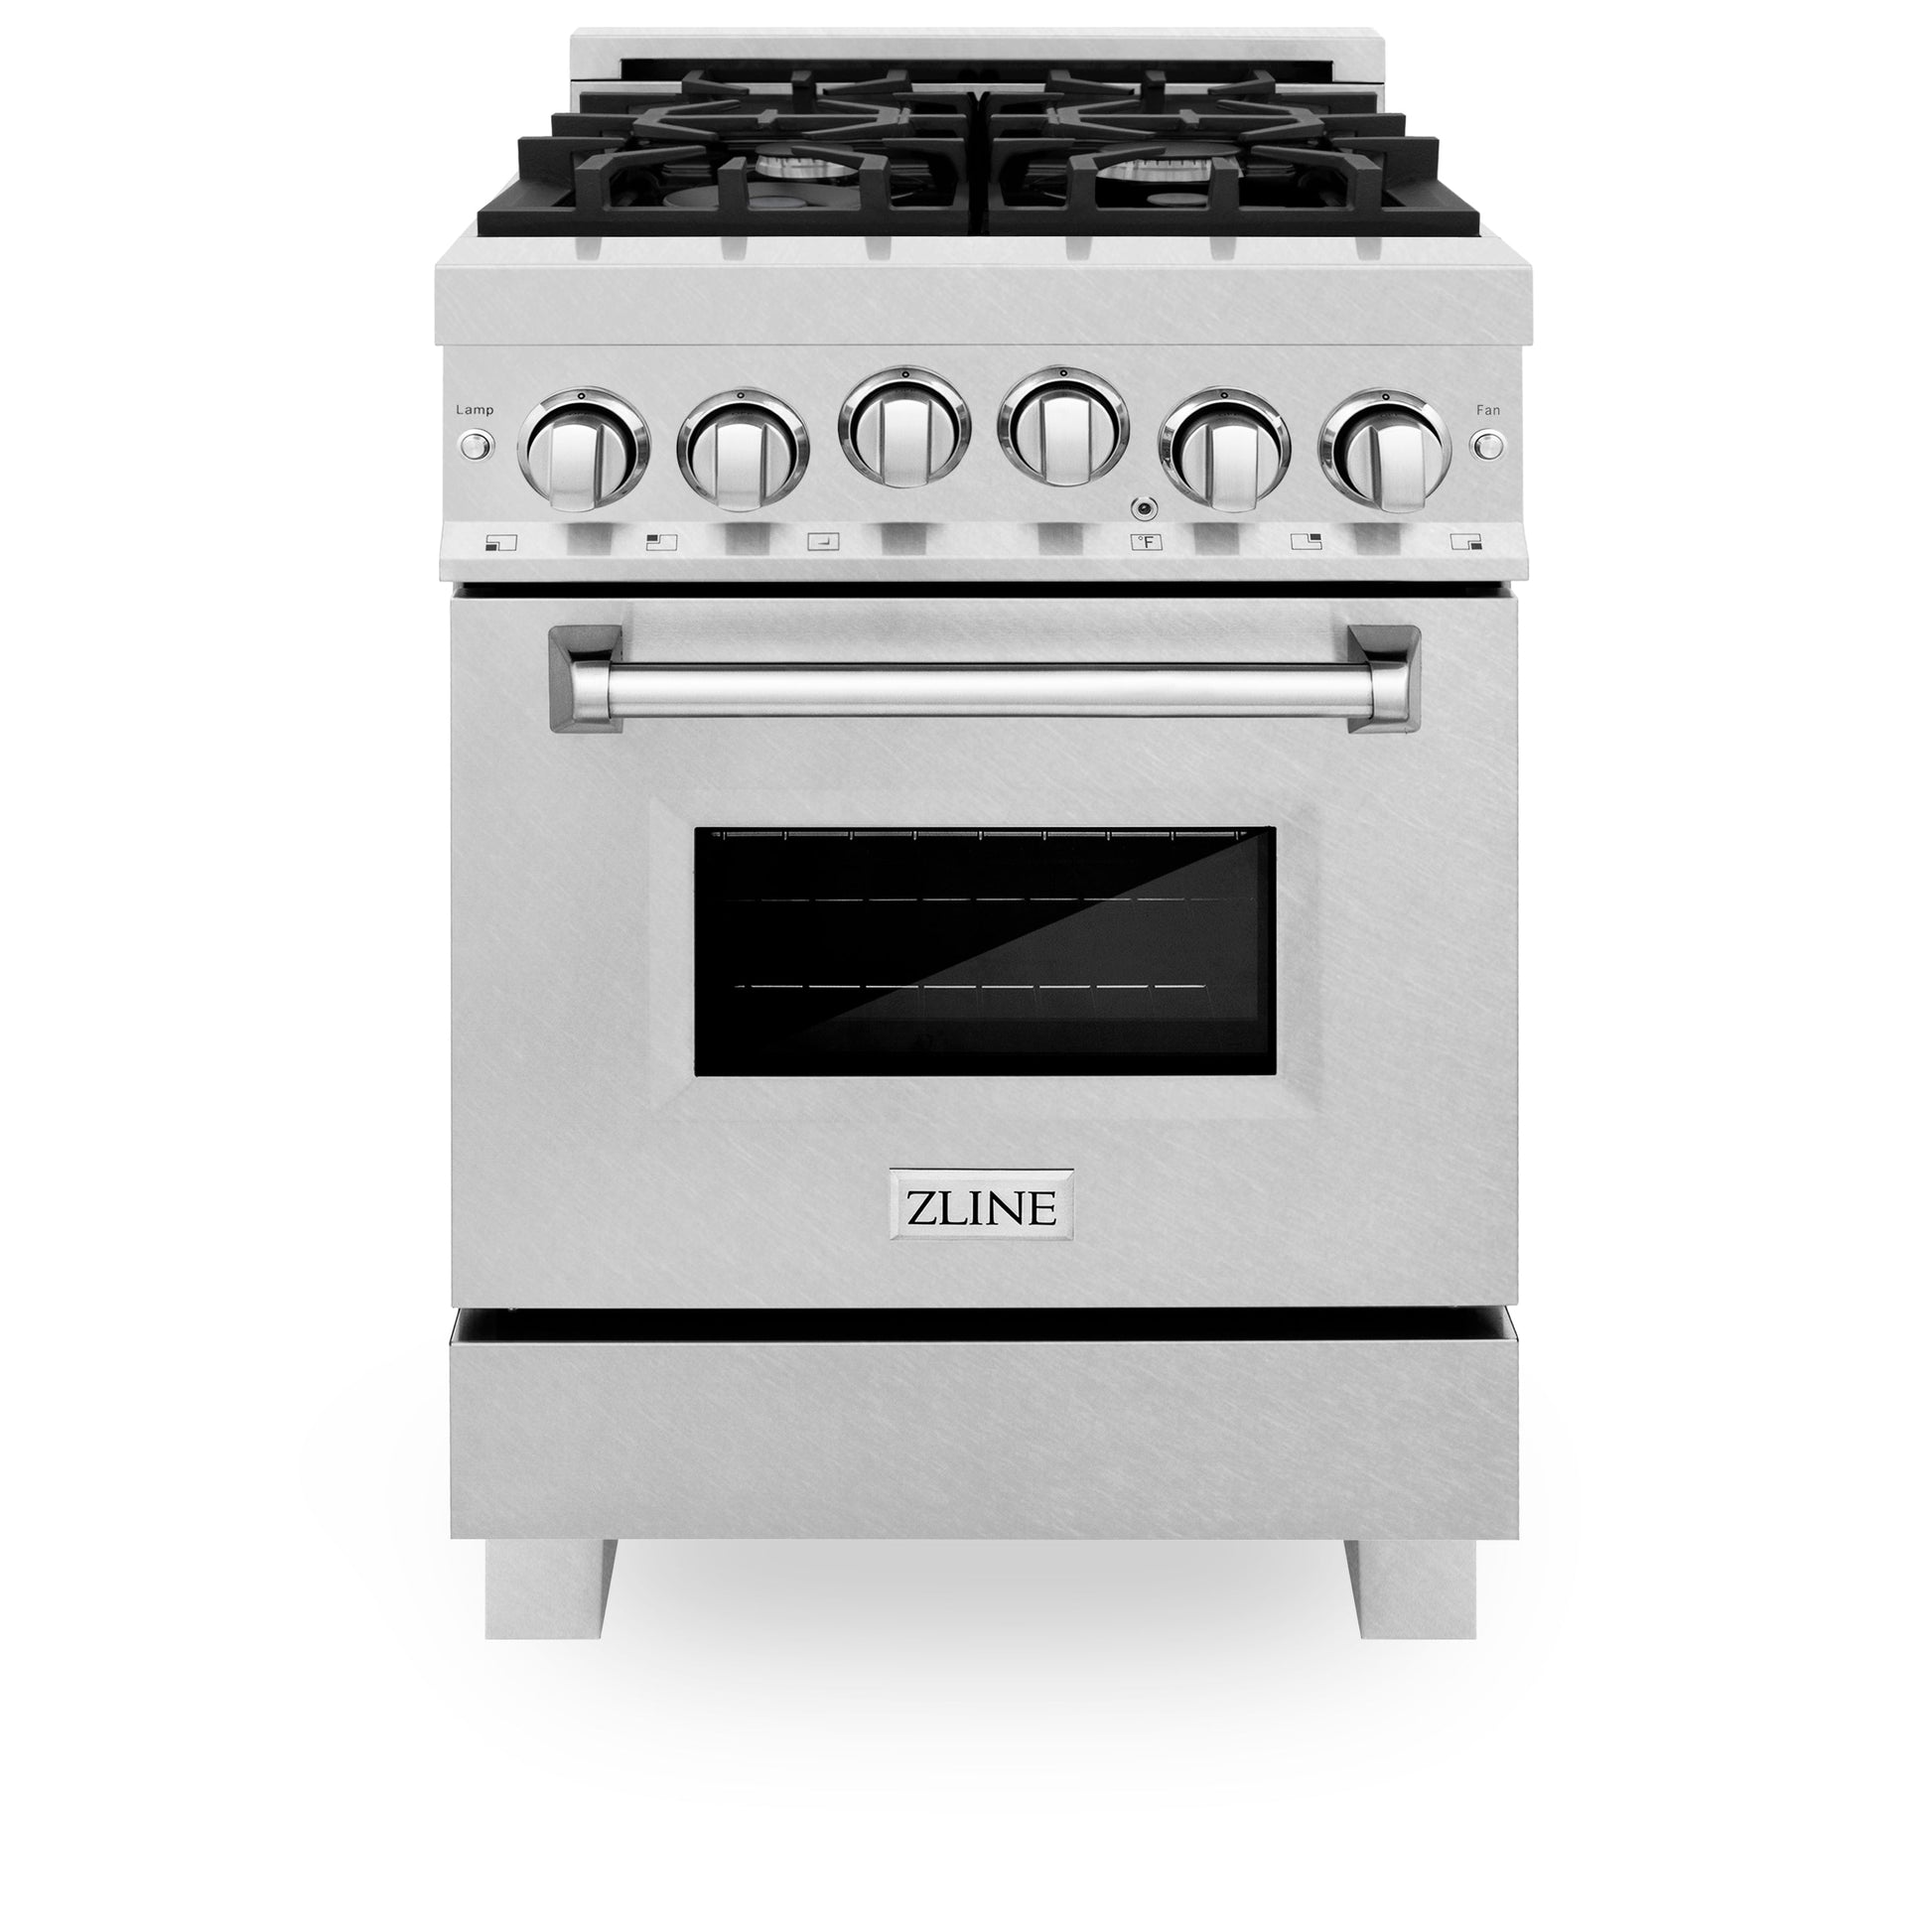 ZLINE 24" Gas Oven and Cooktop Range with Griddle - Fingerprint Resistant Stainless Steel